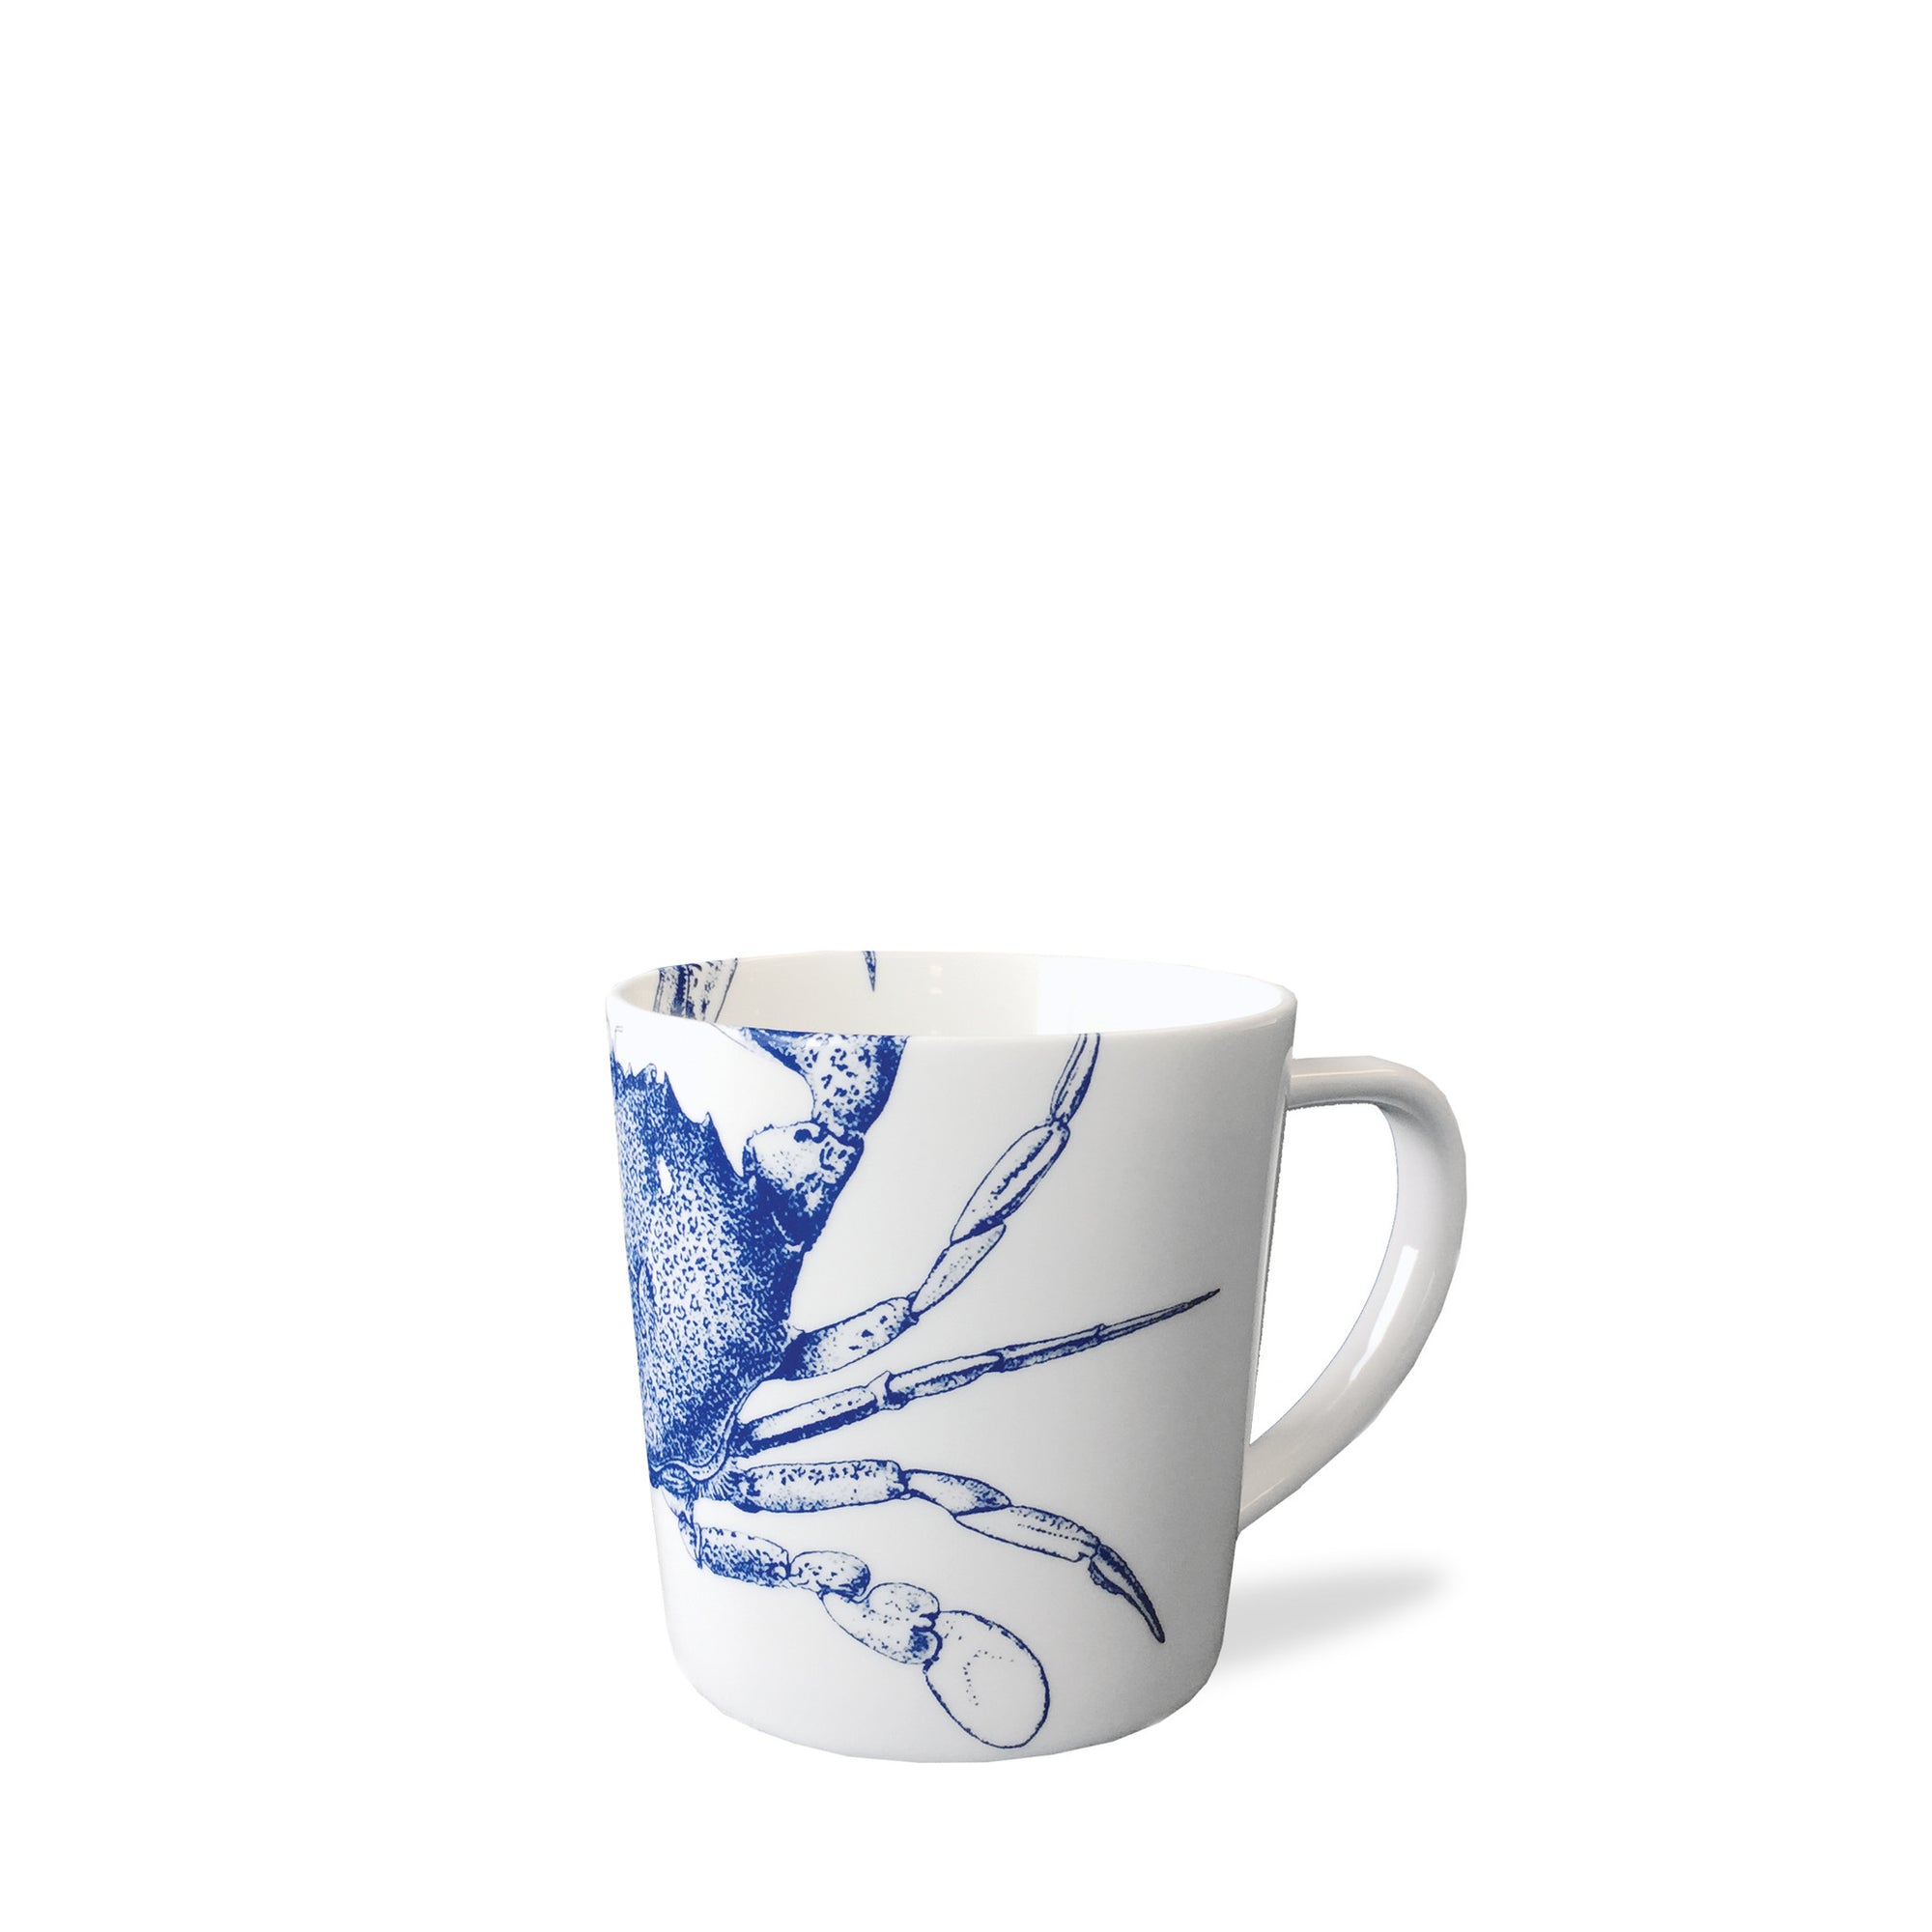 Crab Mug featuring a blue crab illustration, made from high-fired porcelain and placed against a plain white background. This dishwasher safe mug from Caskata Artisanal Home is perfect for adding a touch of coastal charm to any kitchen.